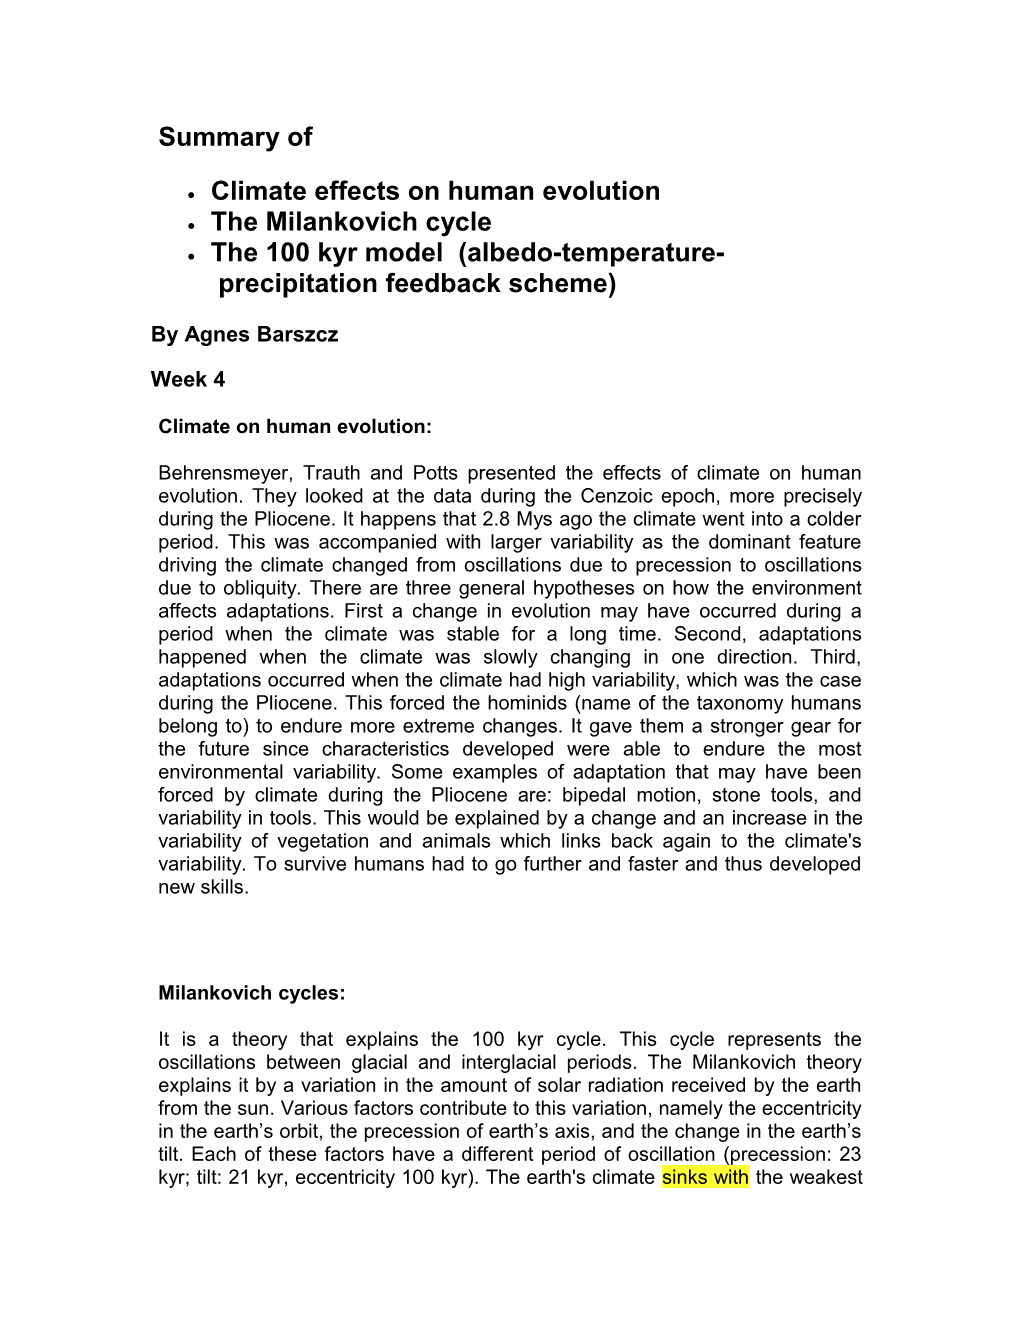 Climate Effects on Human Evolution